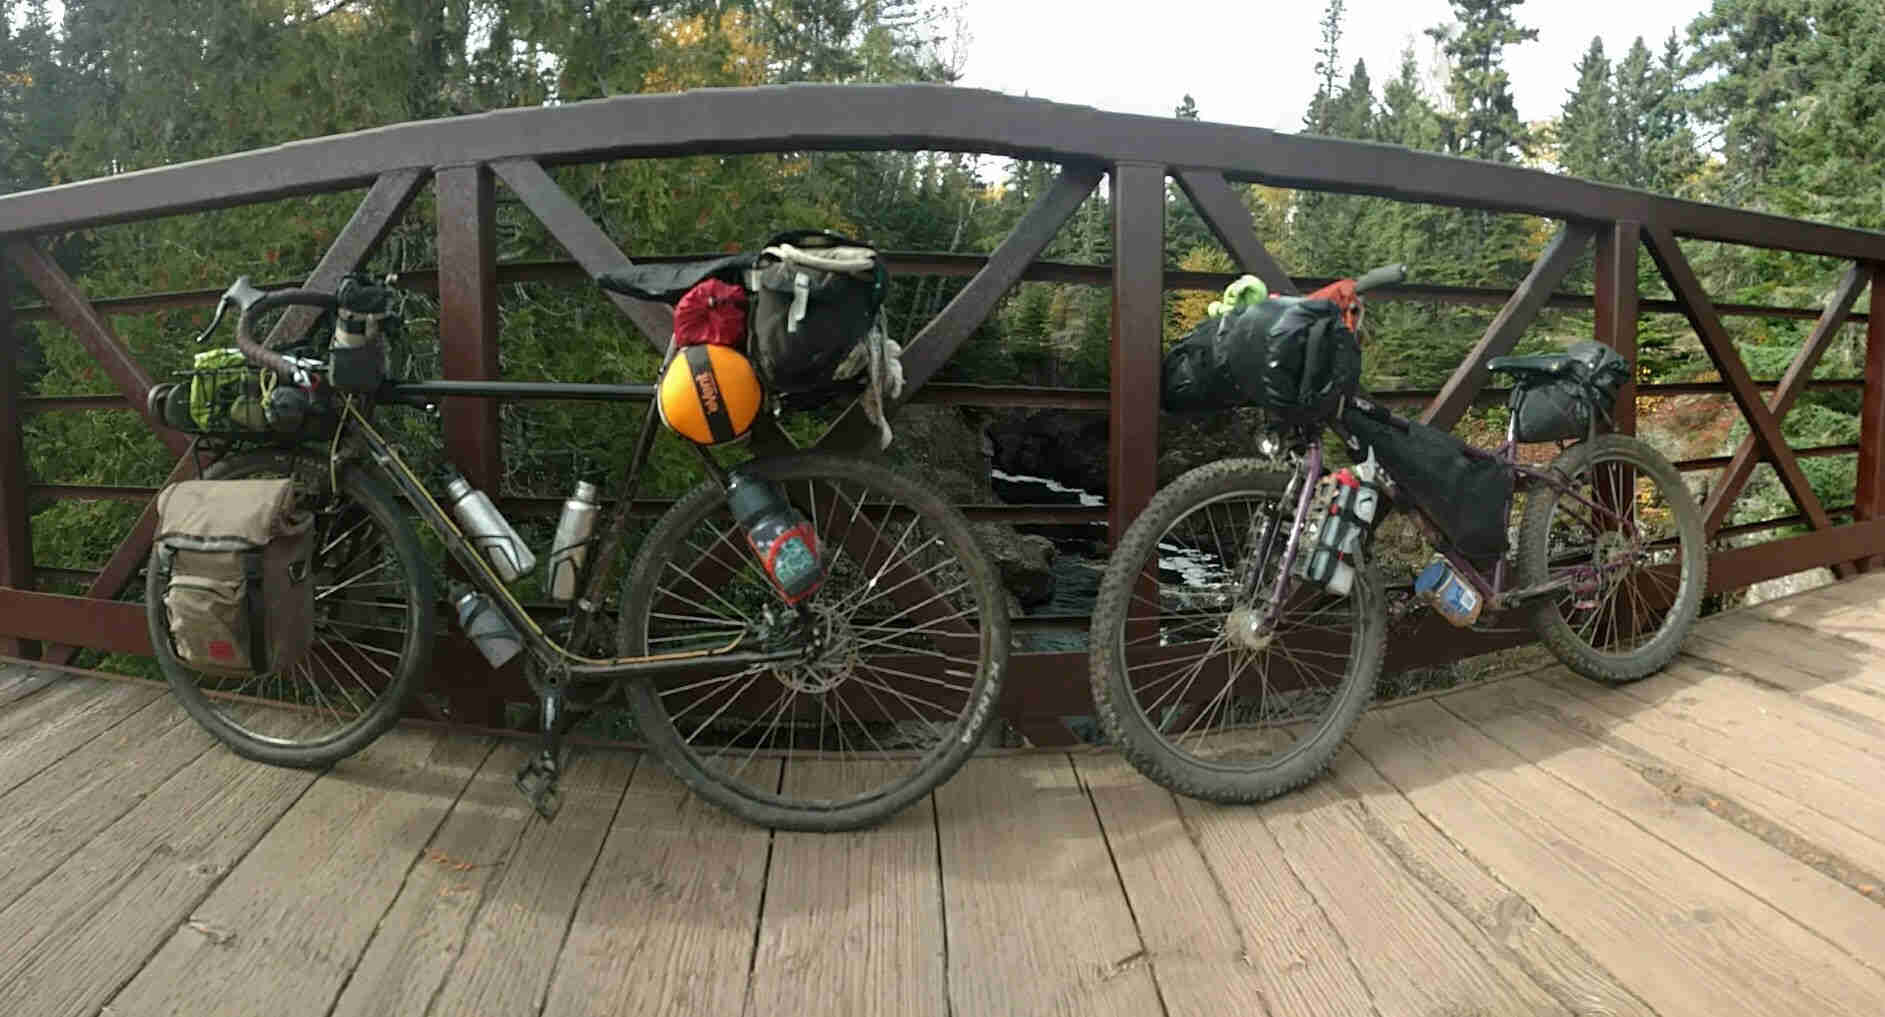 Left side view of 2 Surly bikes, loaded with gear, leaning on steel rail of a wood bridge over a river with trees surrounding it